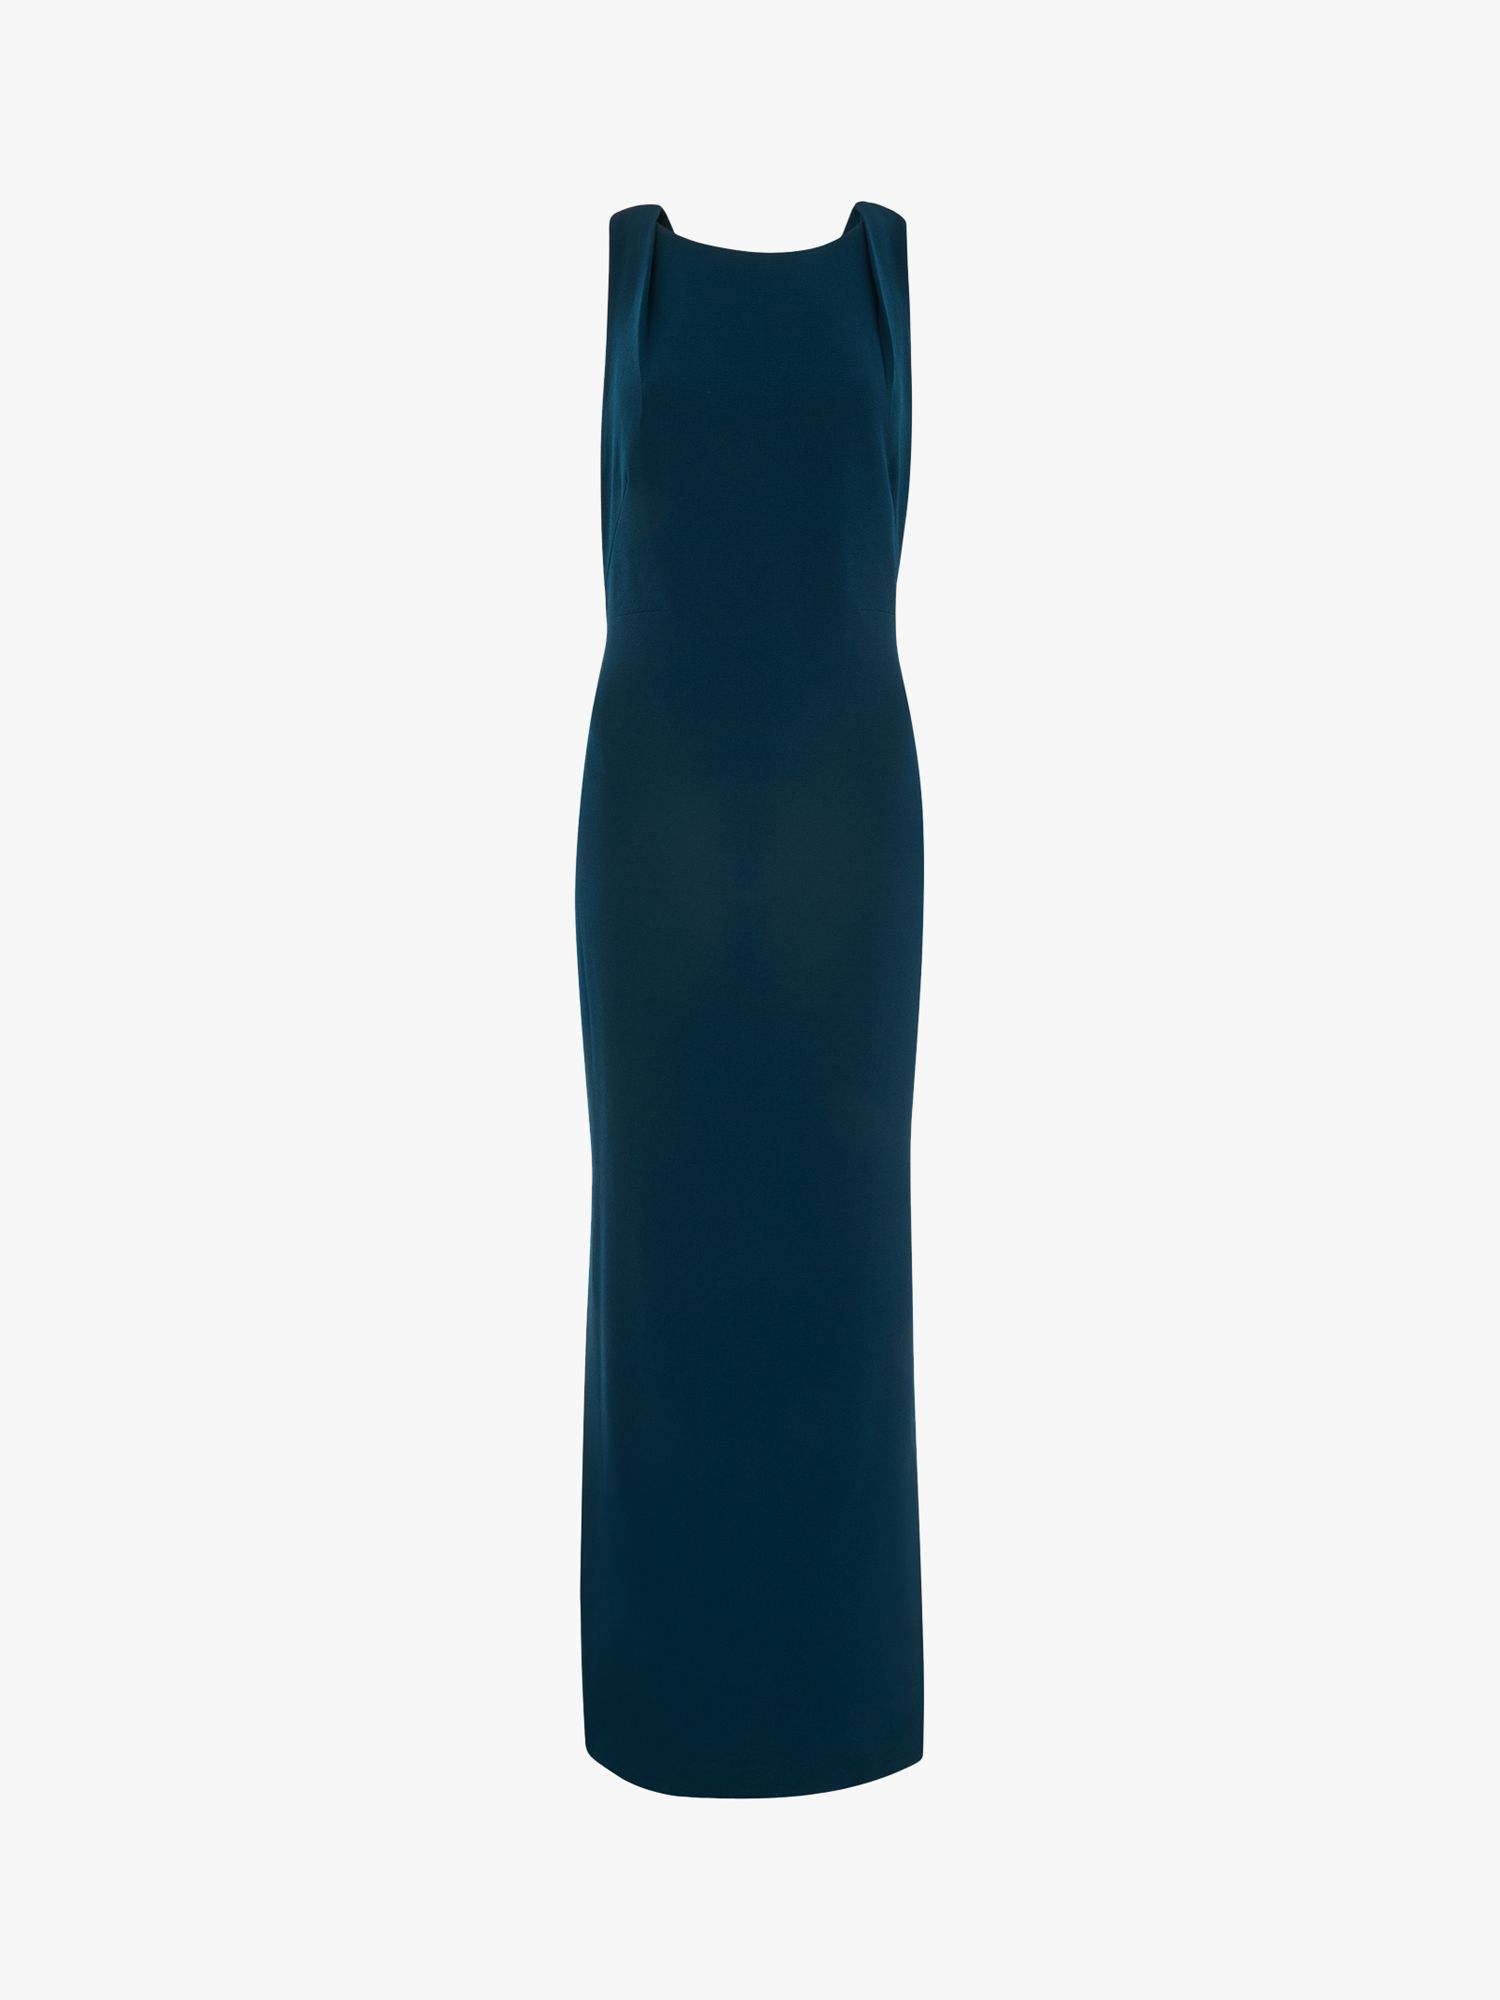 Whistles Tie Back Maxi Dress, Teal at John Lewis & Partners